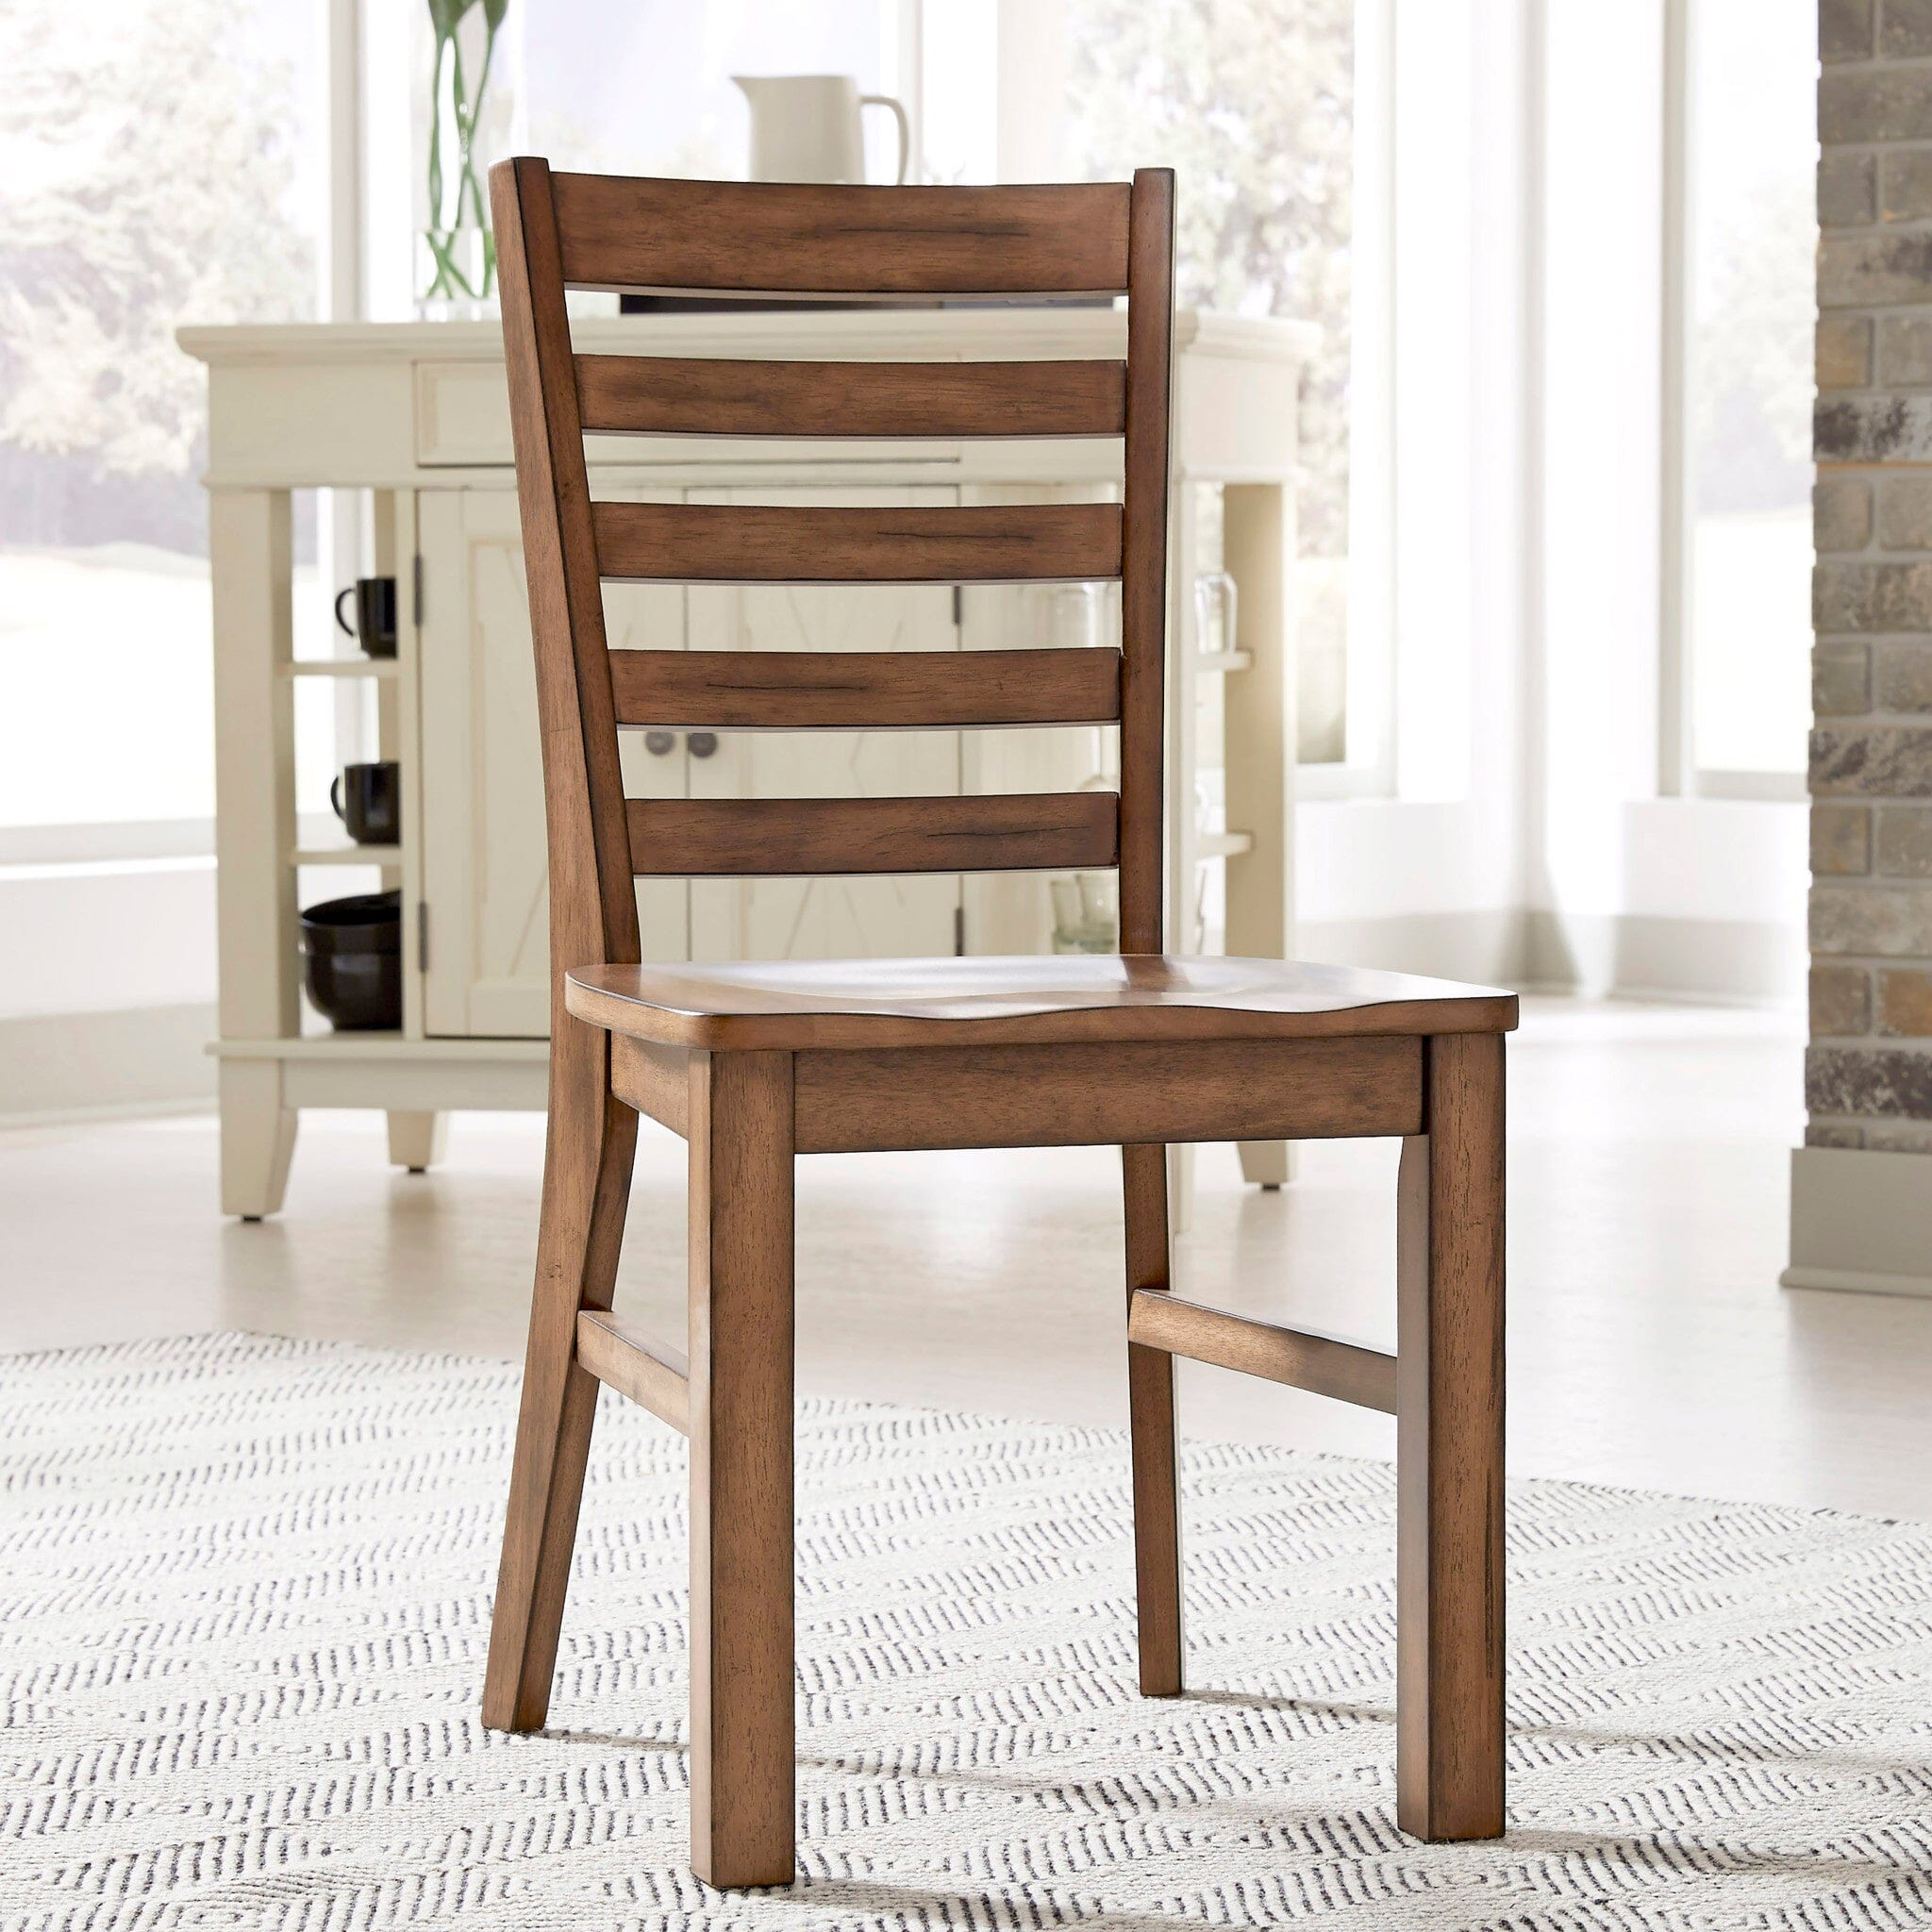 Modern & Contemporary Dining Chair Pair By Sedona Dining Chair Sedona